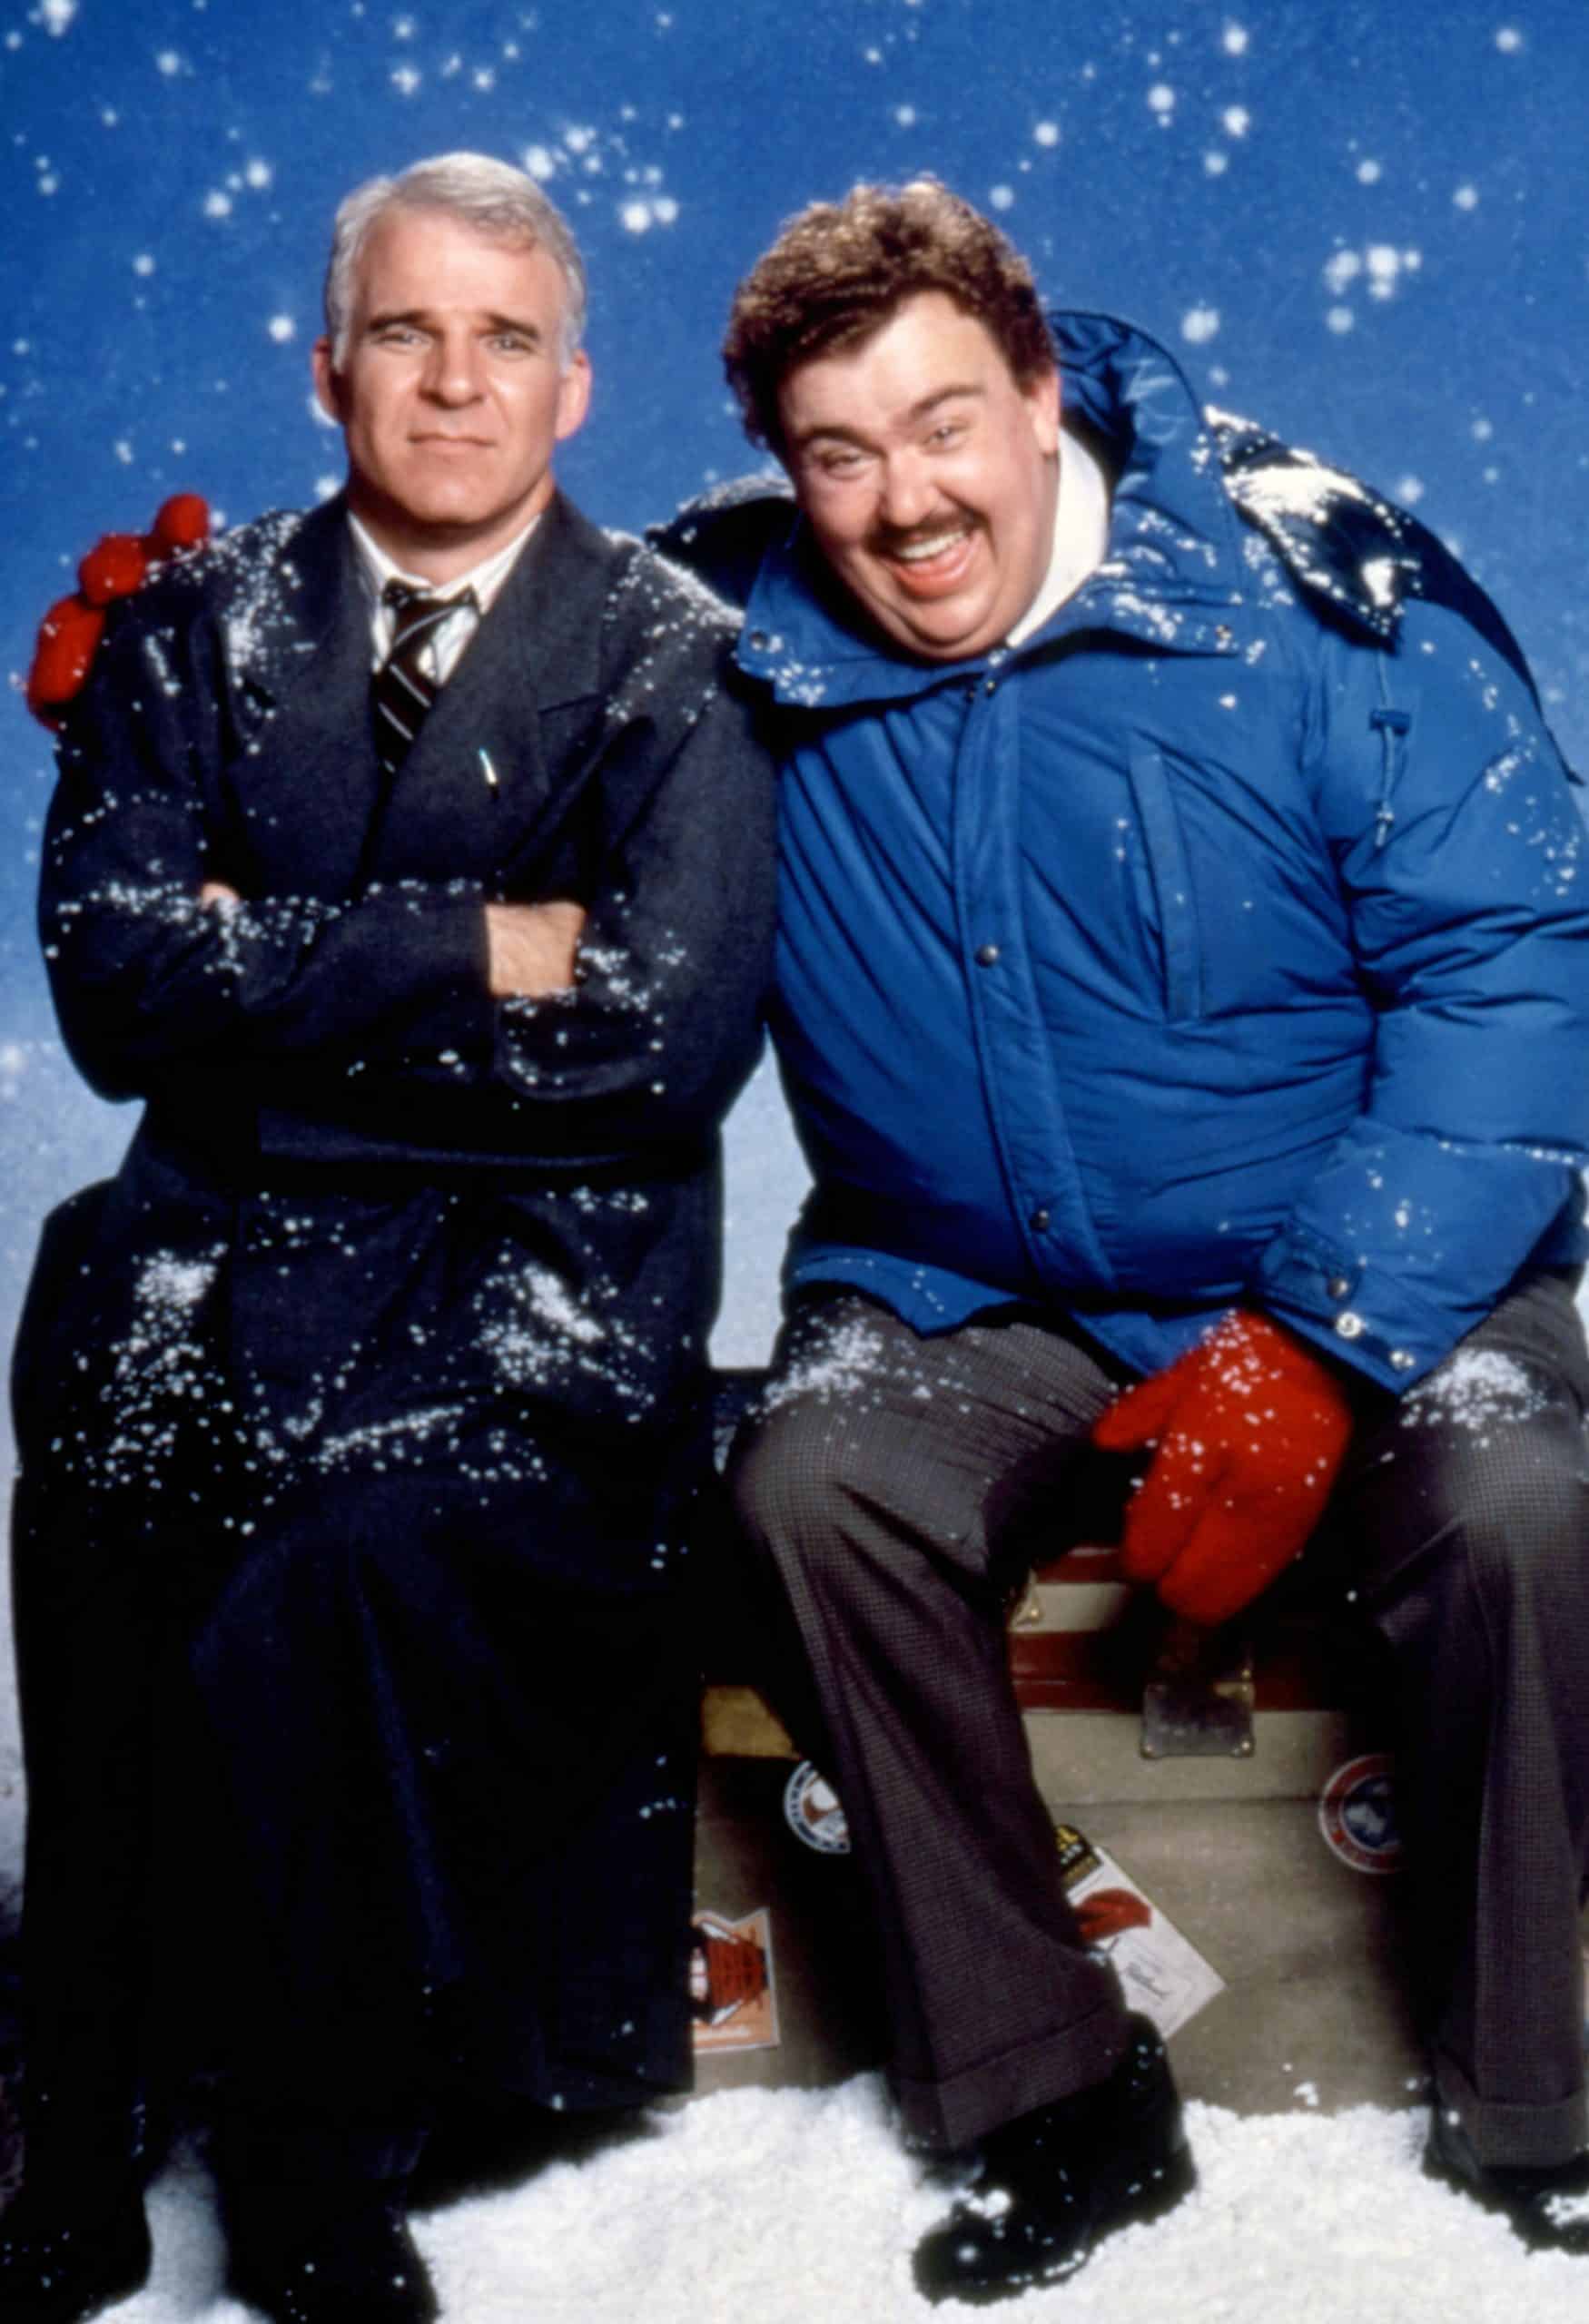 PLANES, TRAINS AND AUTOMOBILES, Steve Martin, John Candy, 1987